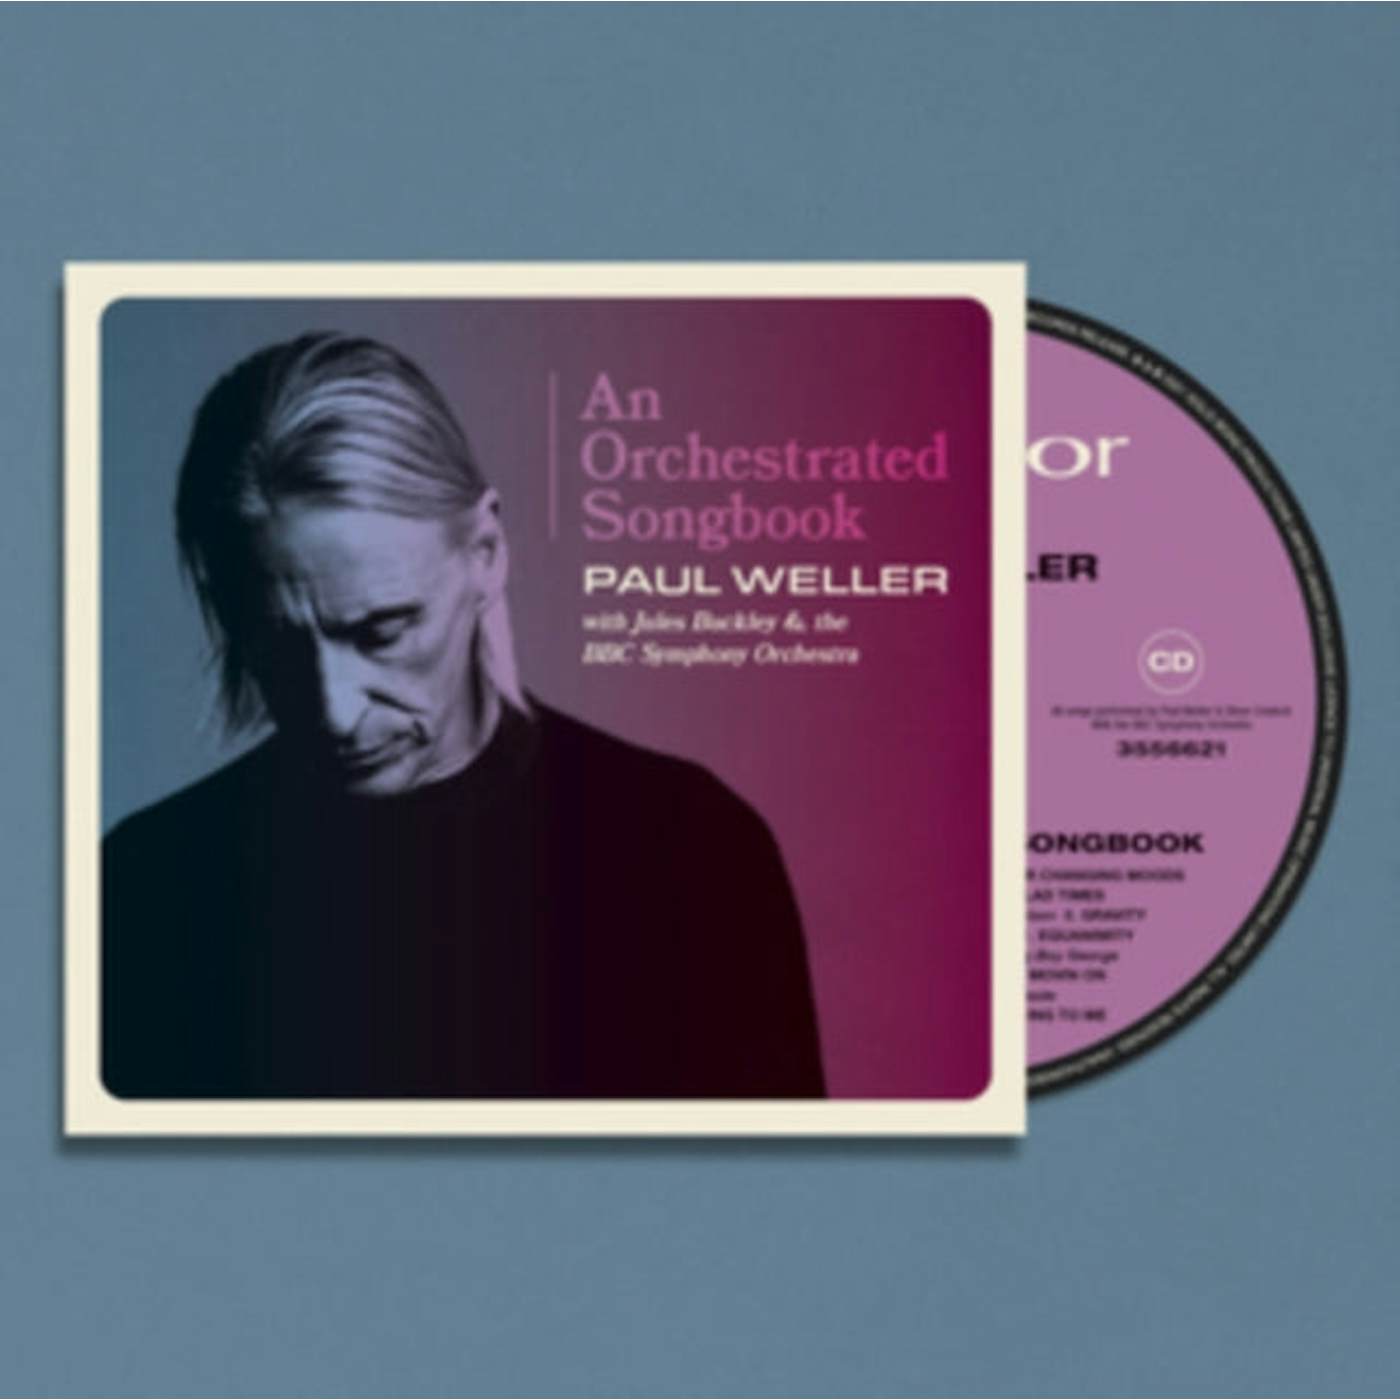 Paul Weller CD - An Orchestrated Songbook - Paul Weller With Jules Buckley & The Bbc Symphony Orchestra